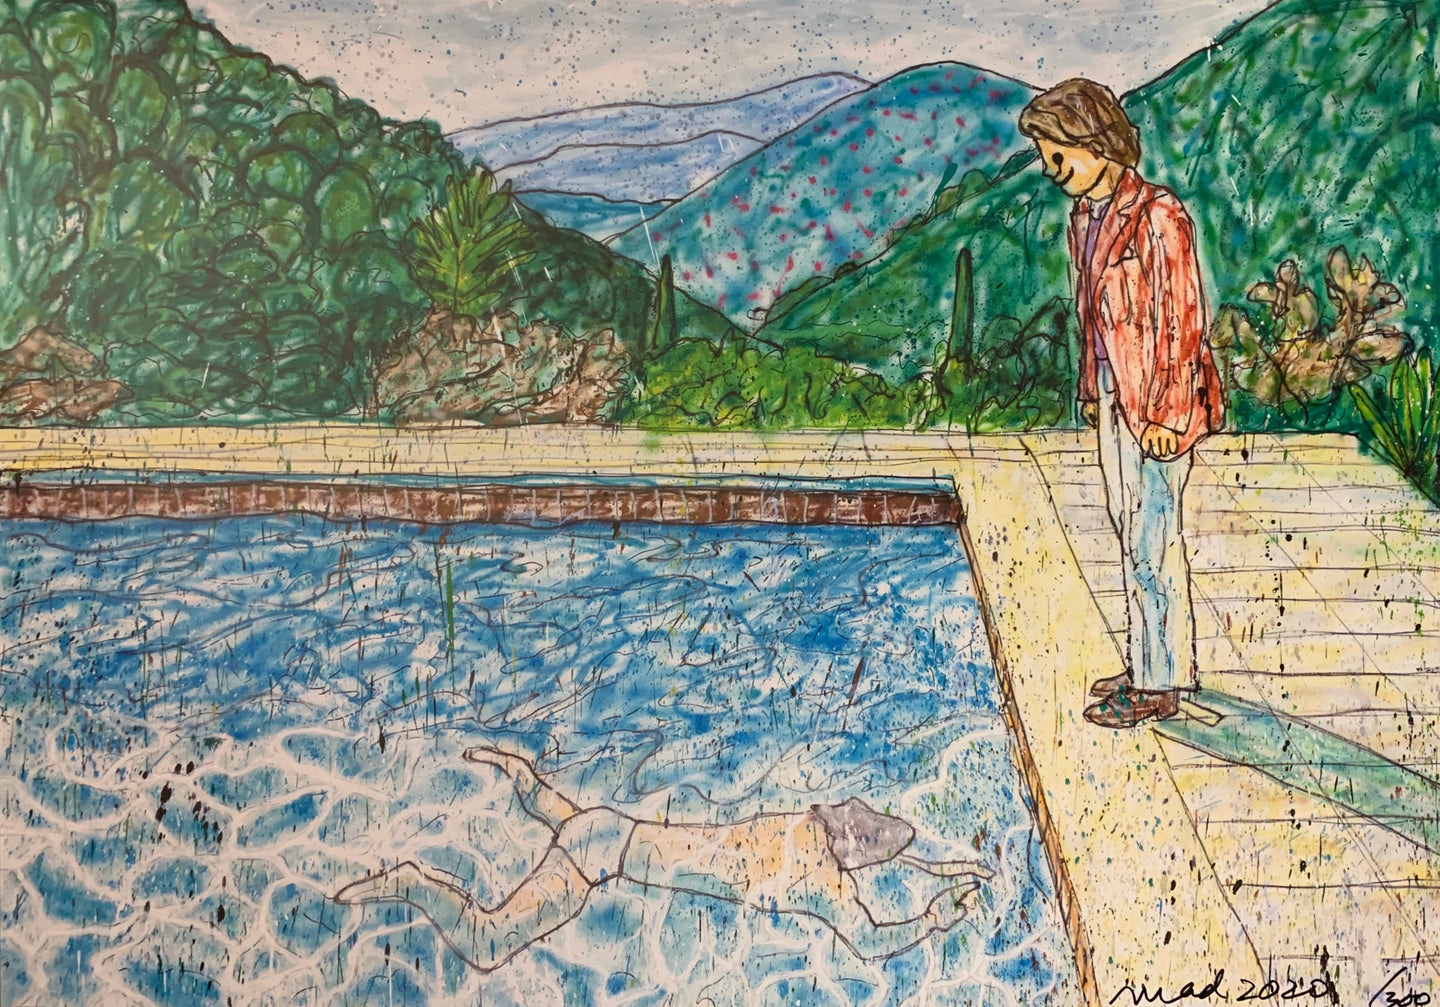 Portrait of an Artist (Pool with Two Figures) Ⅱ (inspired by David Hockney)